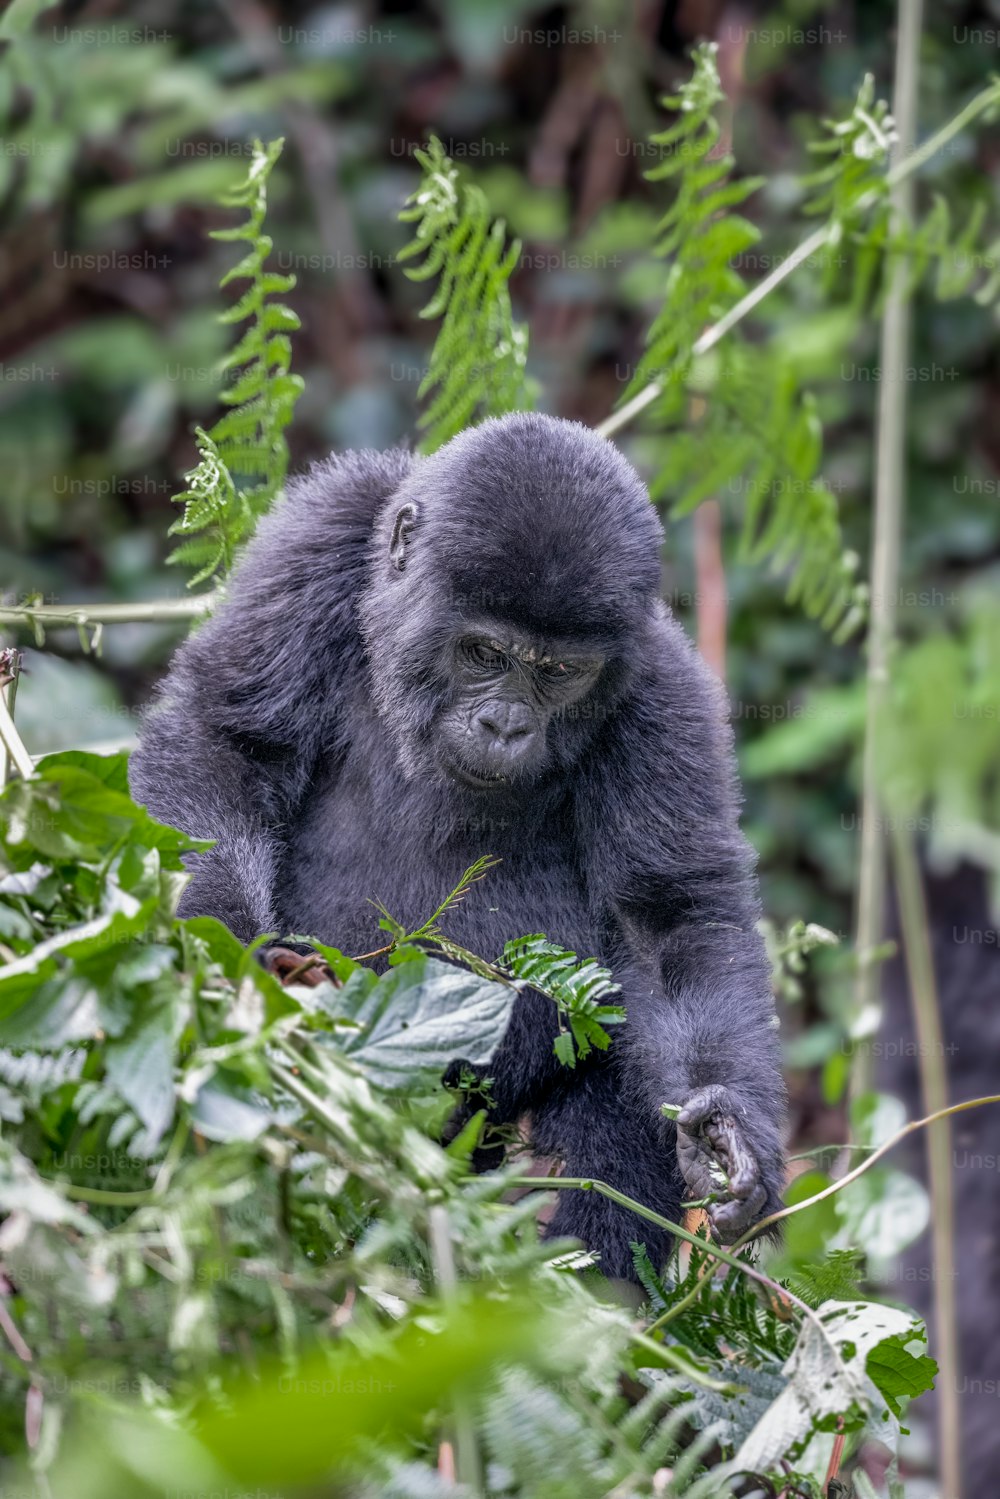 a gorilla sitting in the middle of a forest